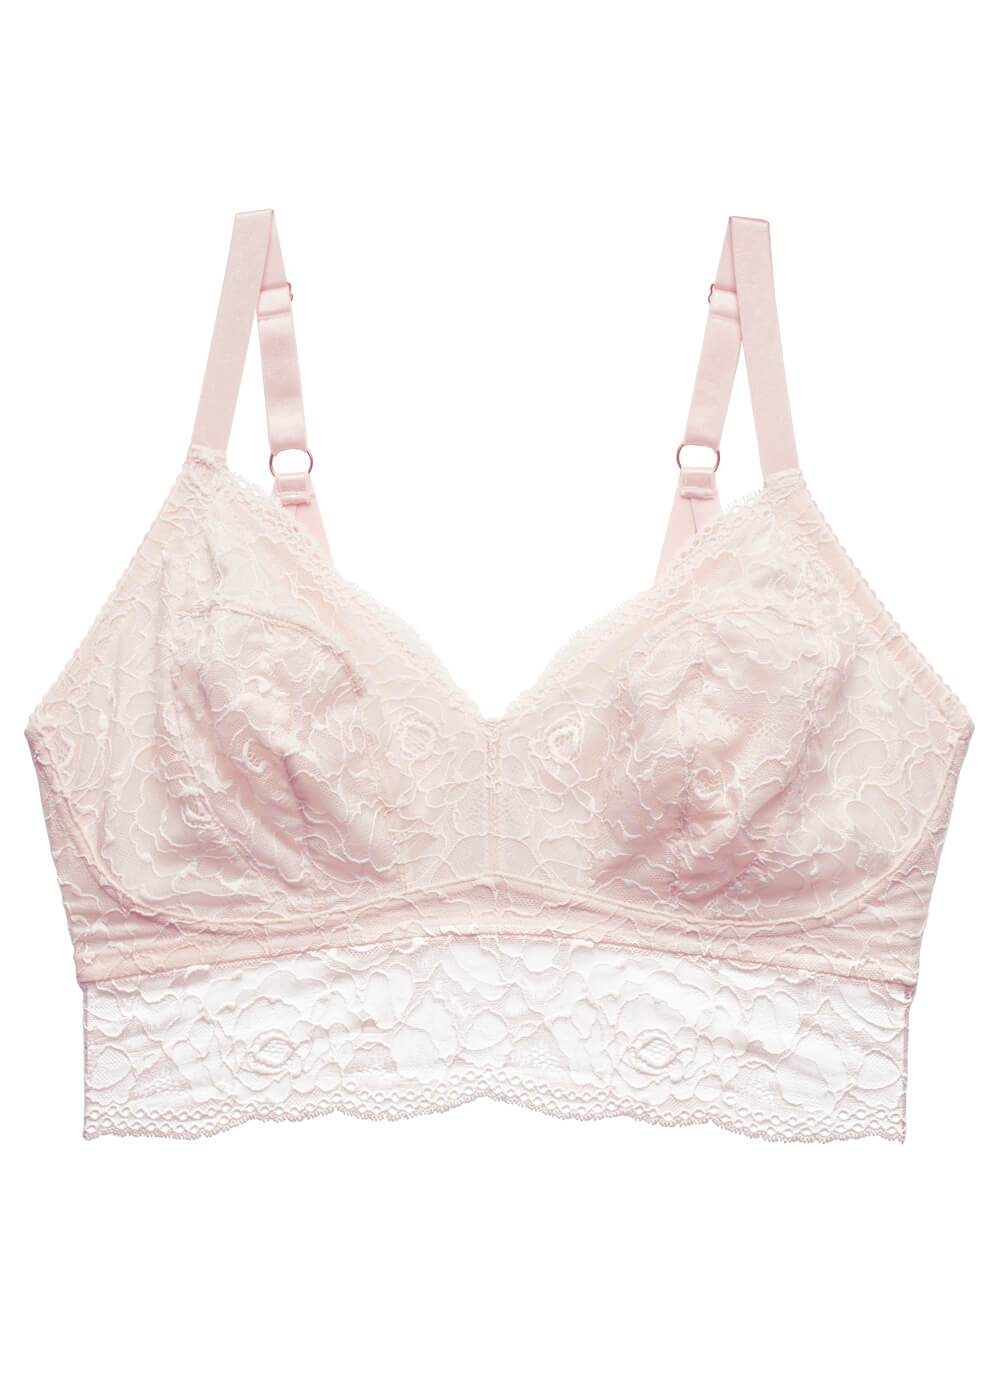 Heroine Lace Maternity Bralette in Shell Pink by HOTmilk